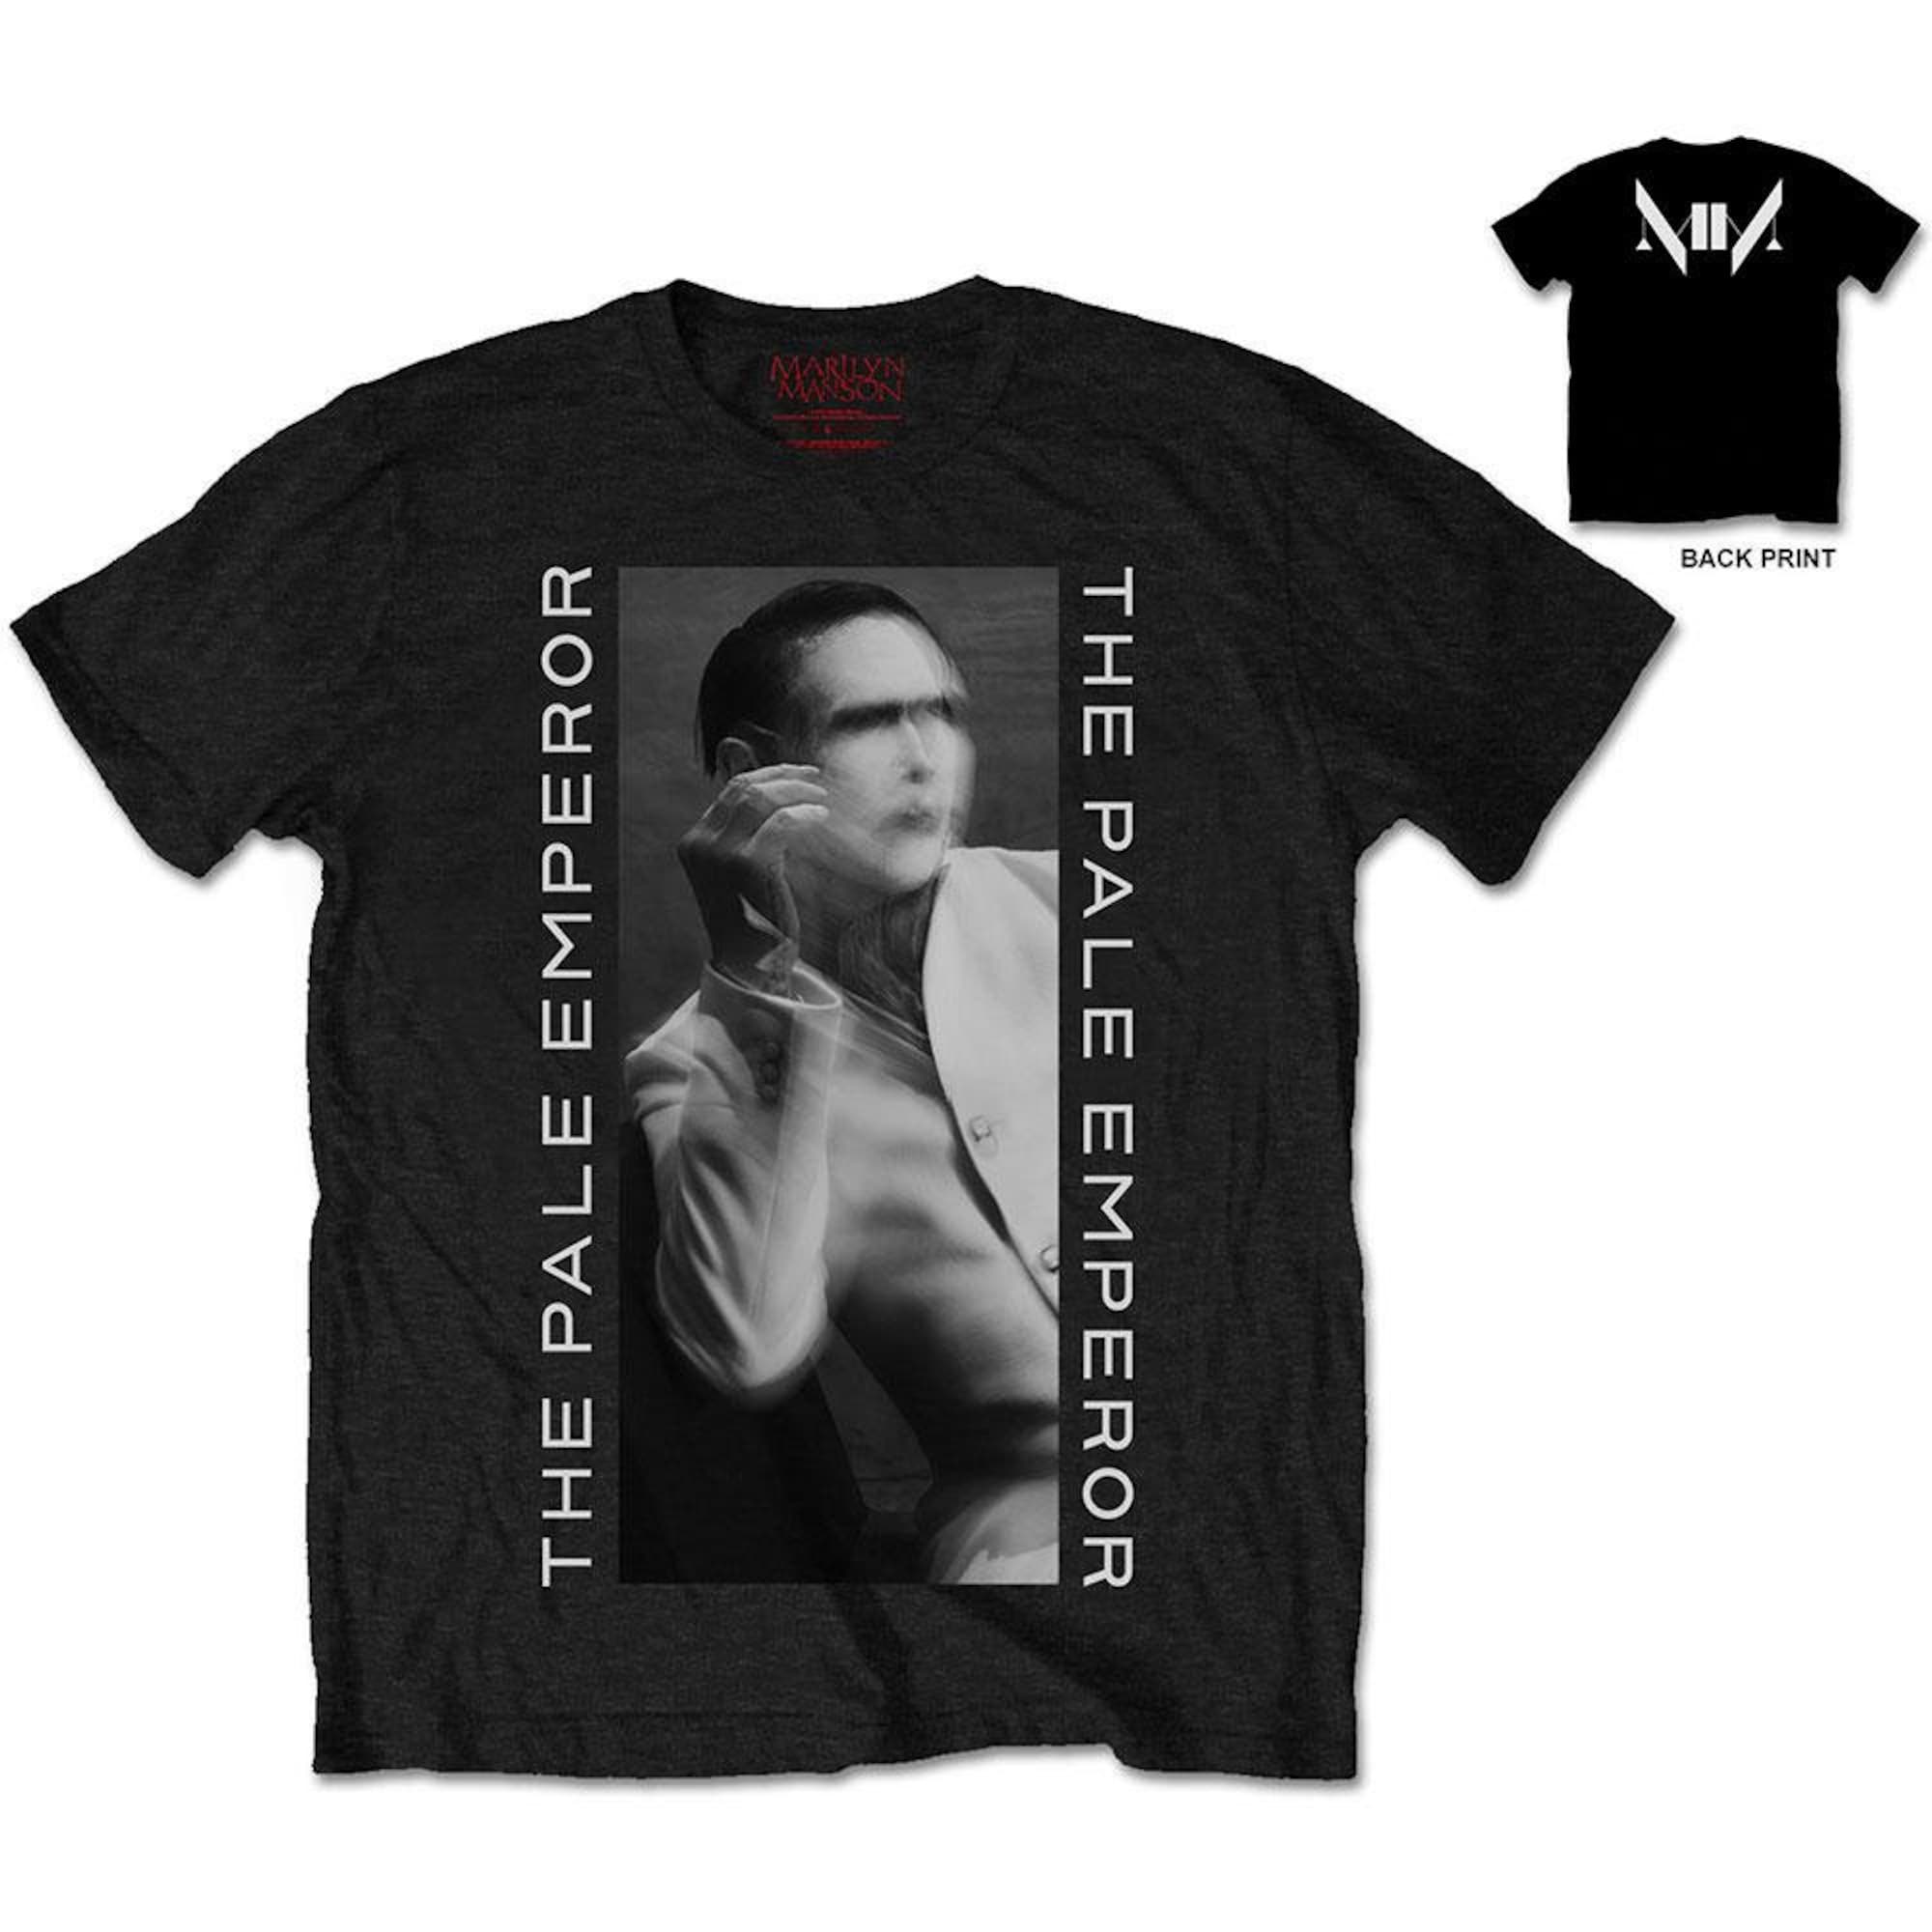 Discover Marilyn Manson Unisex Tee: The Pale Emperor